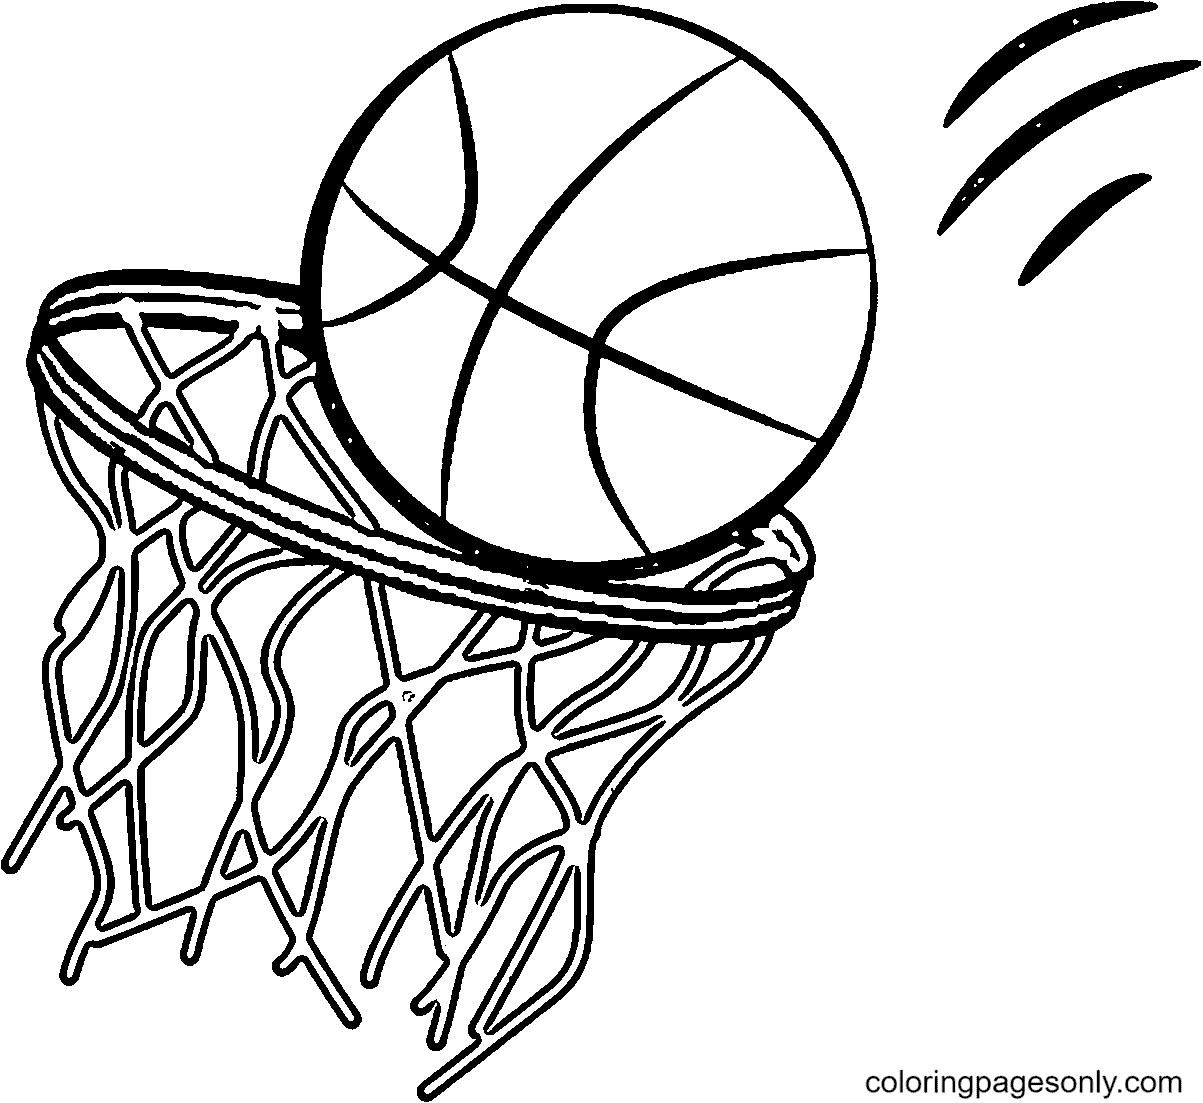 Basketball coloring pages printable for free download